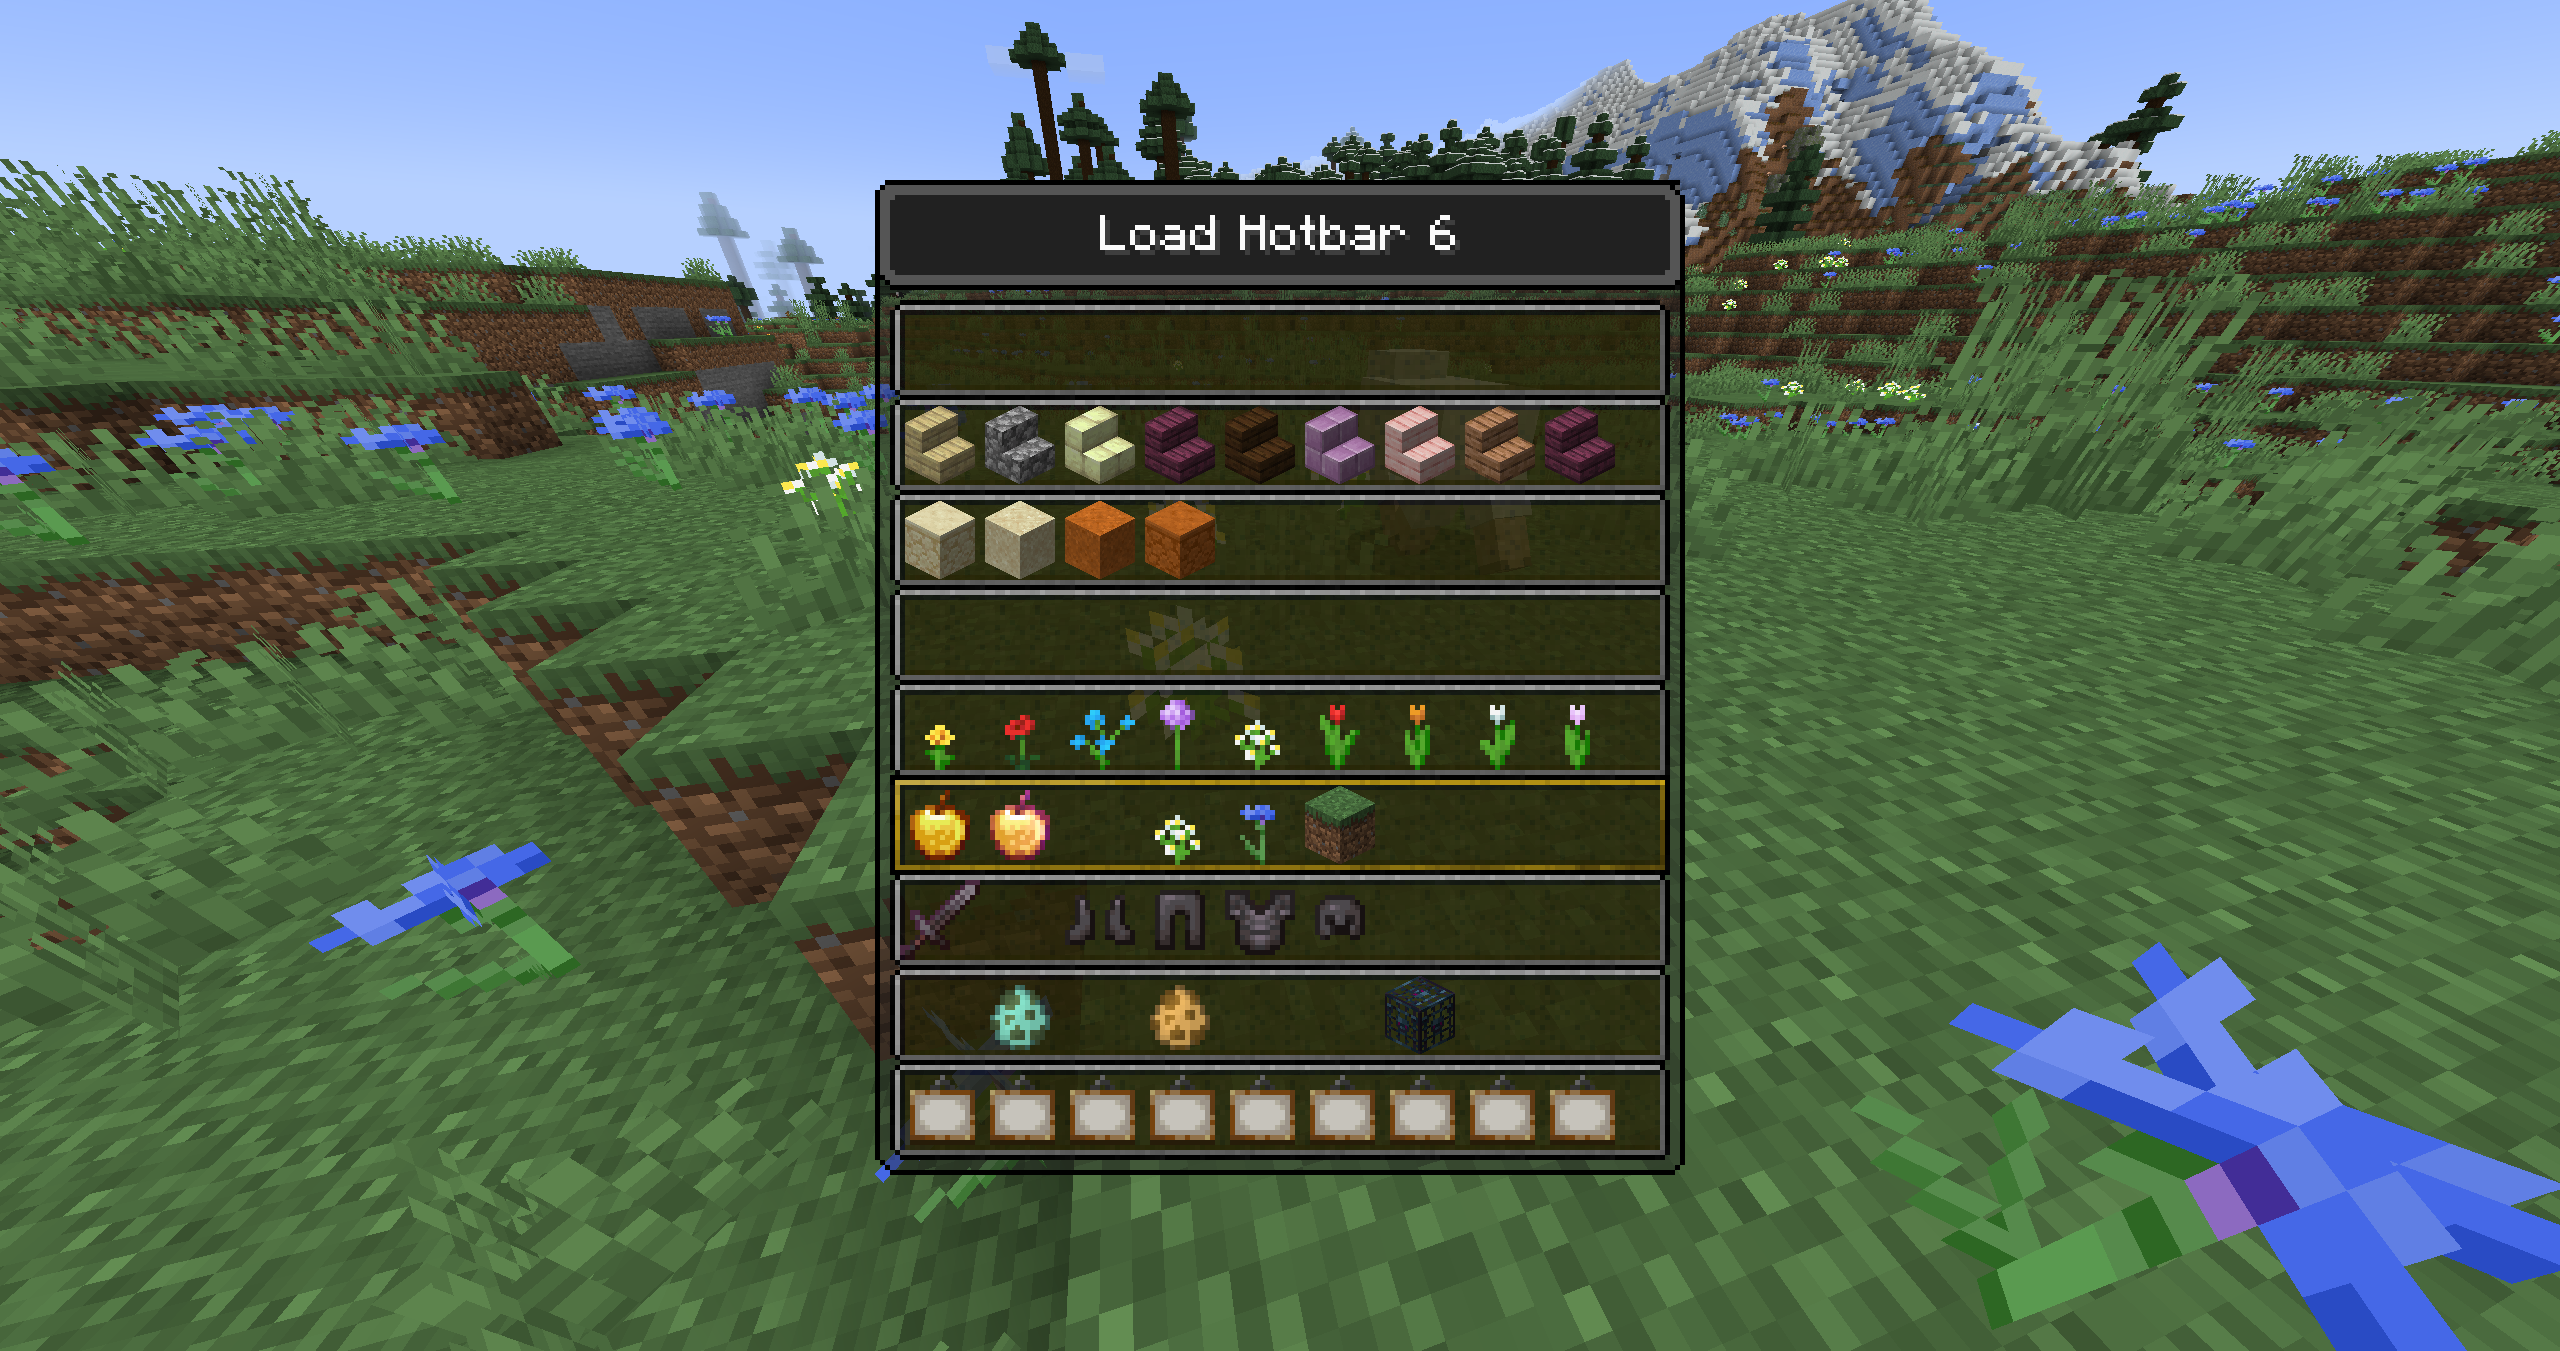 Quickly load a saved-hotbar